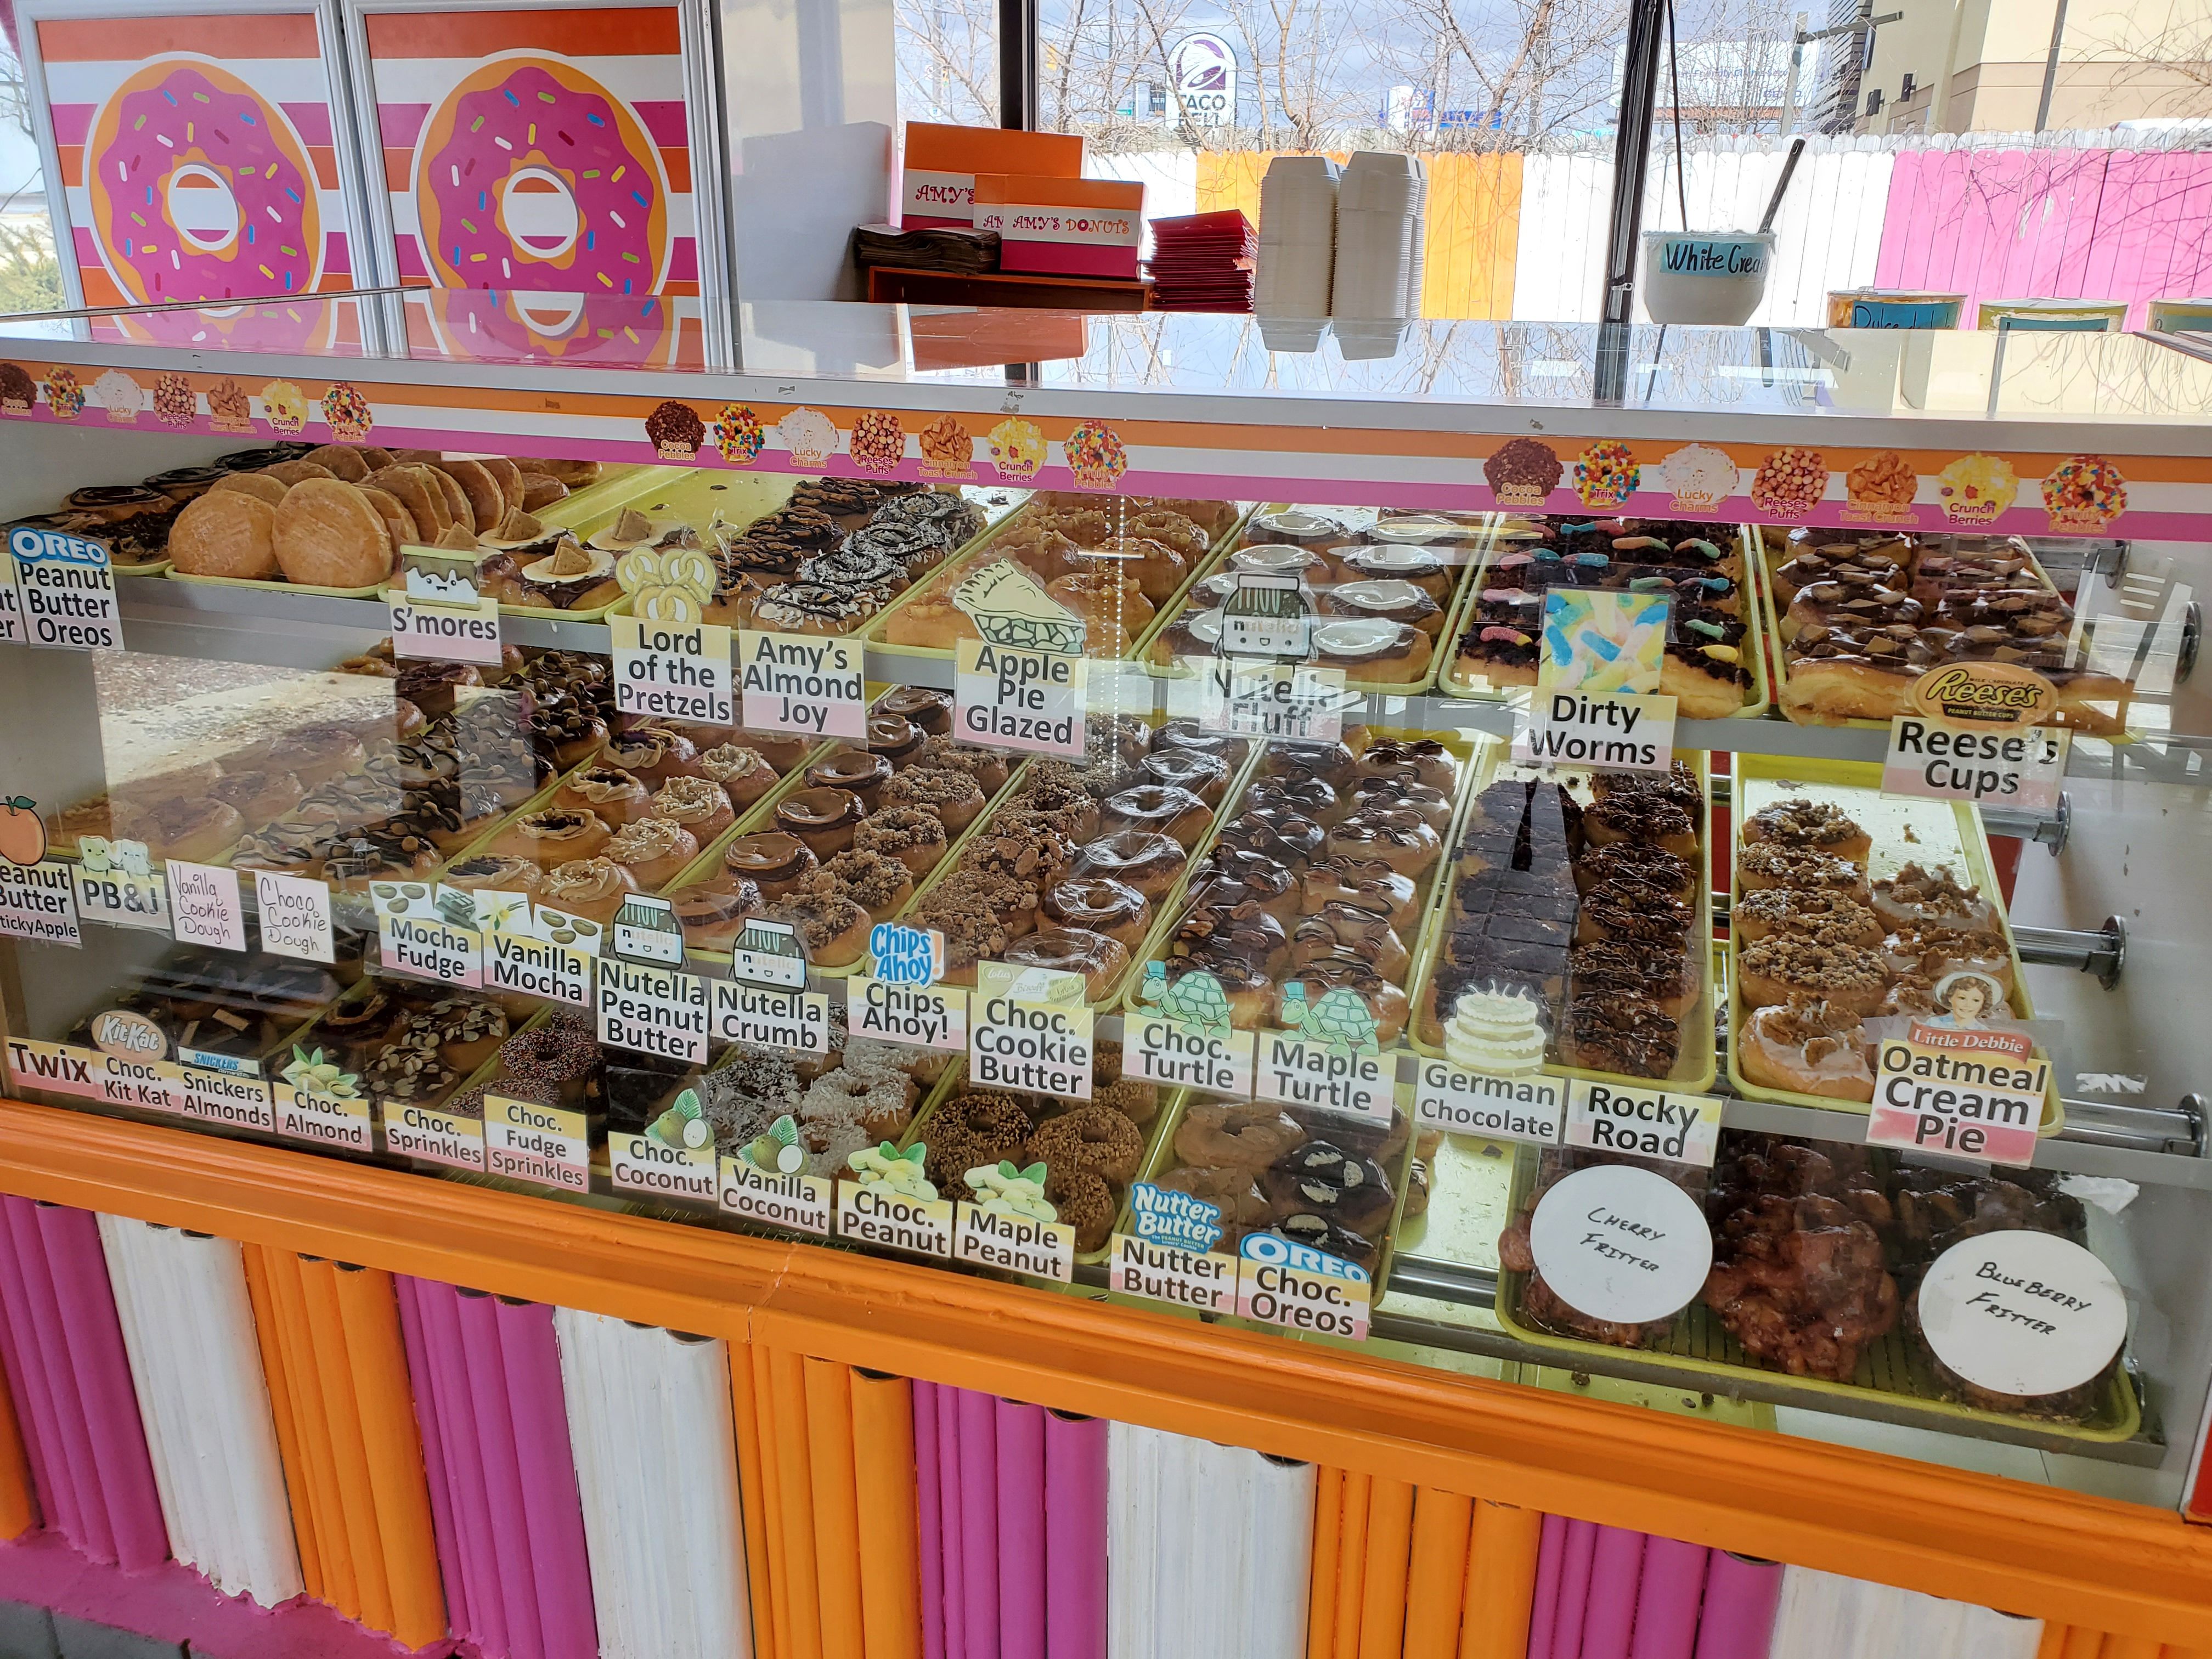 A counter with rows of donuts